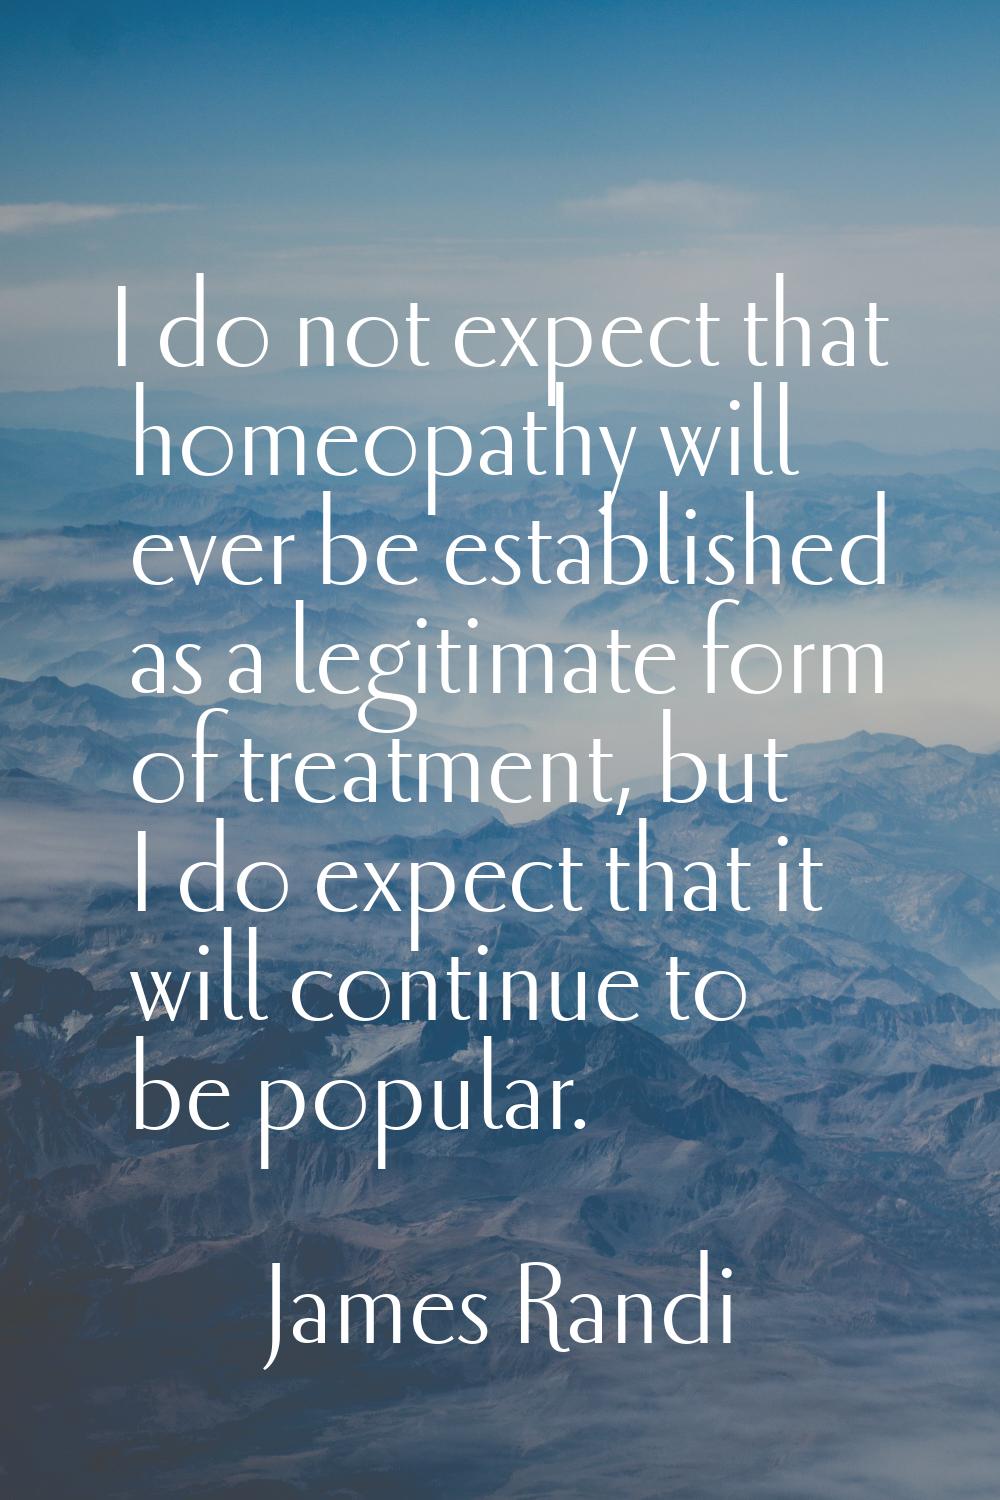 I do not expect that homeopathy will ever be established as a legitimate form of treatment, but I d